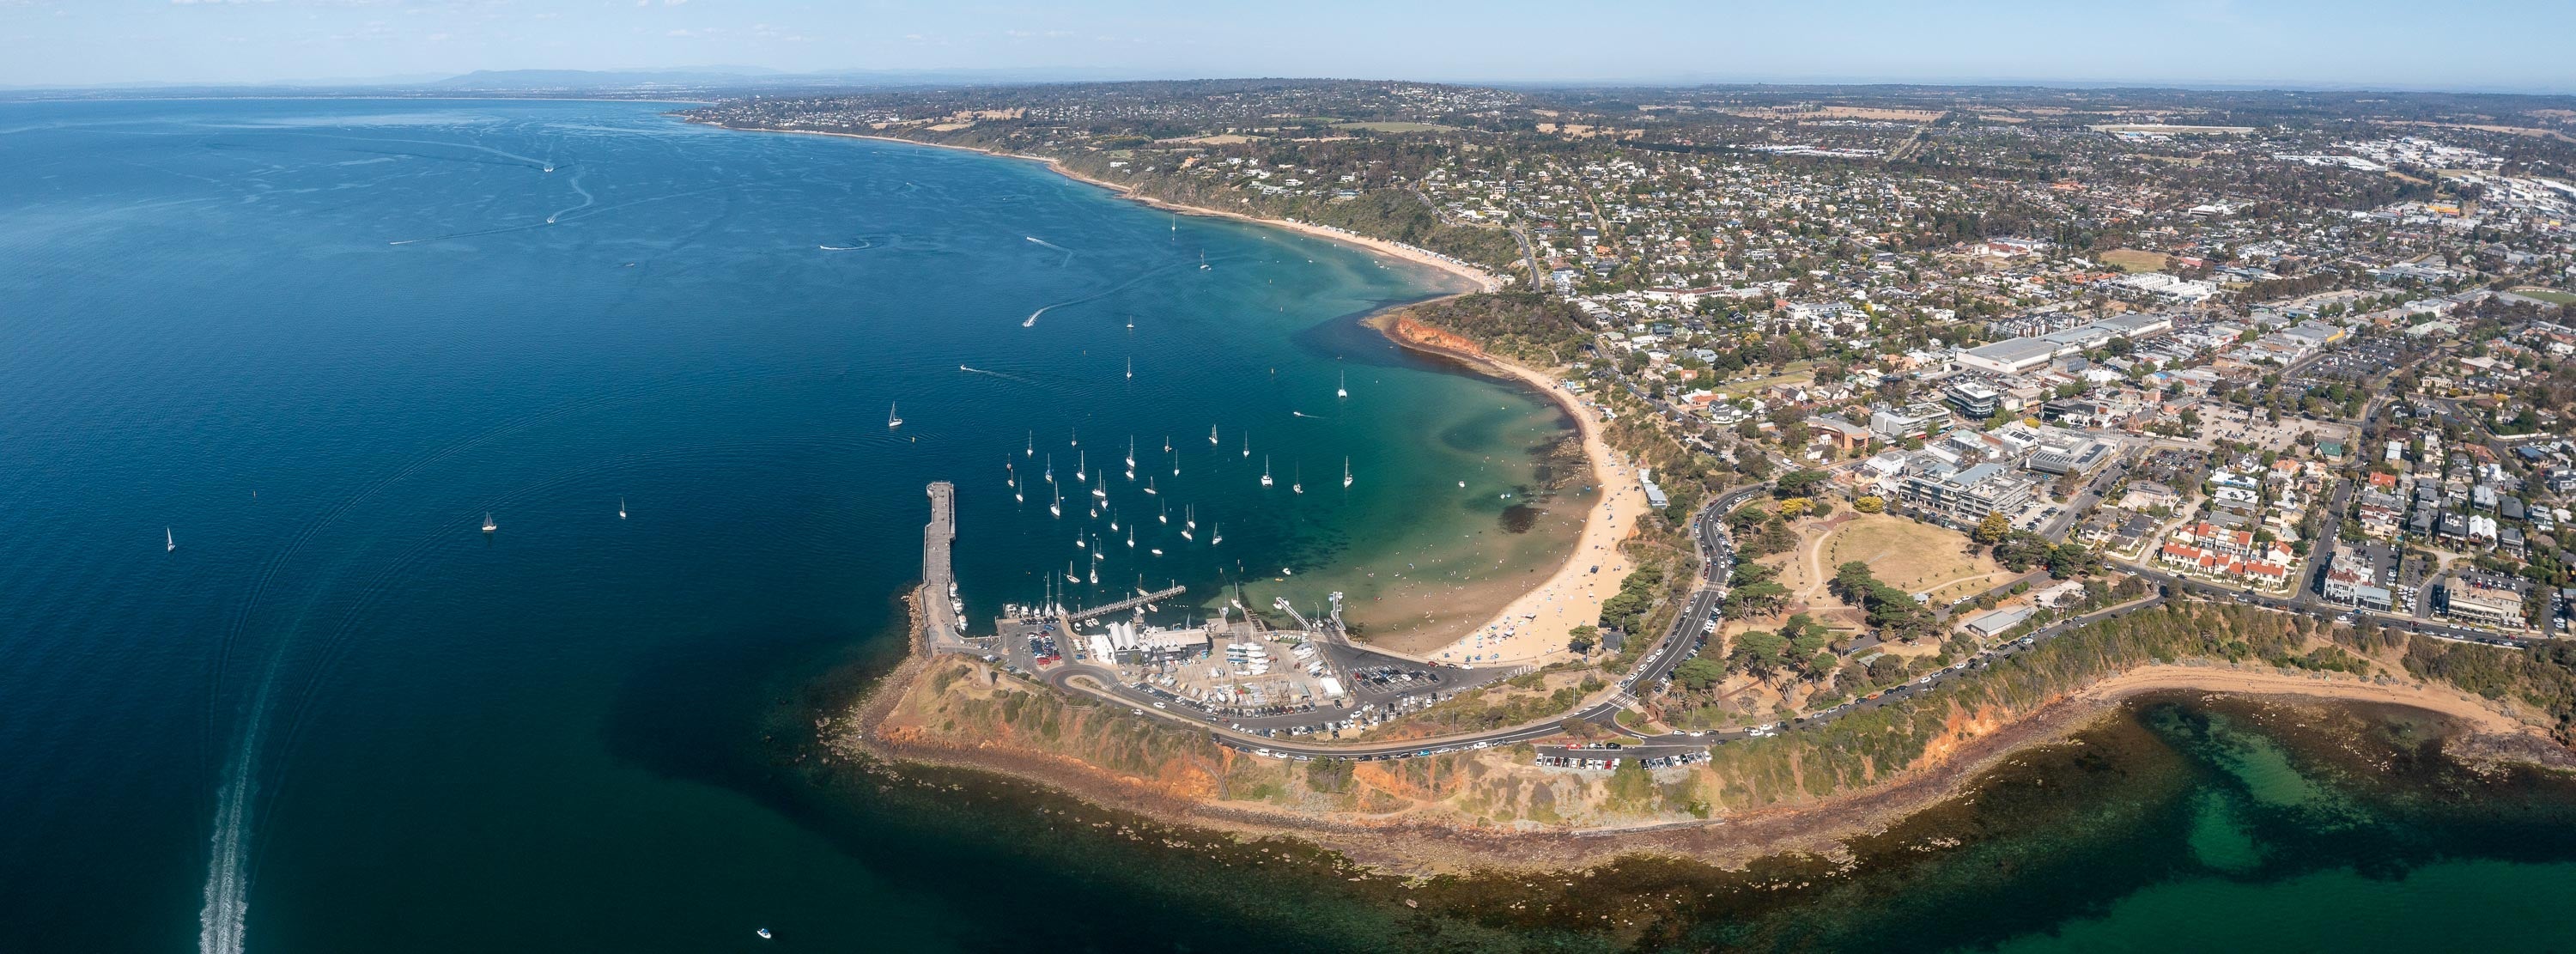 Mornington Harbour from above No.2